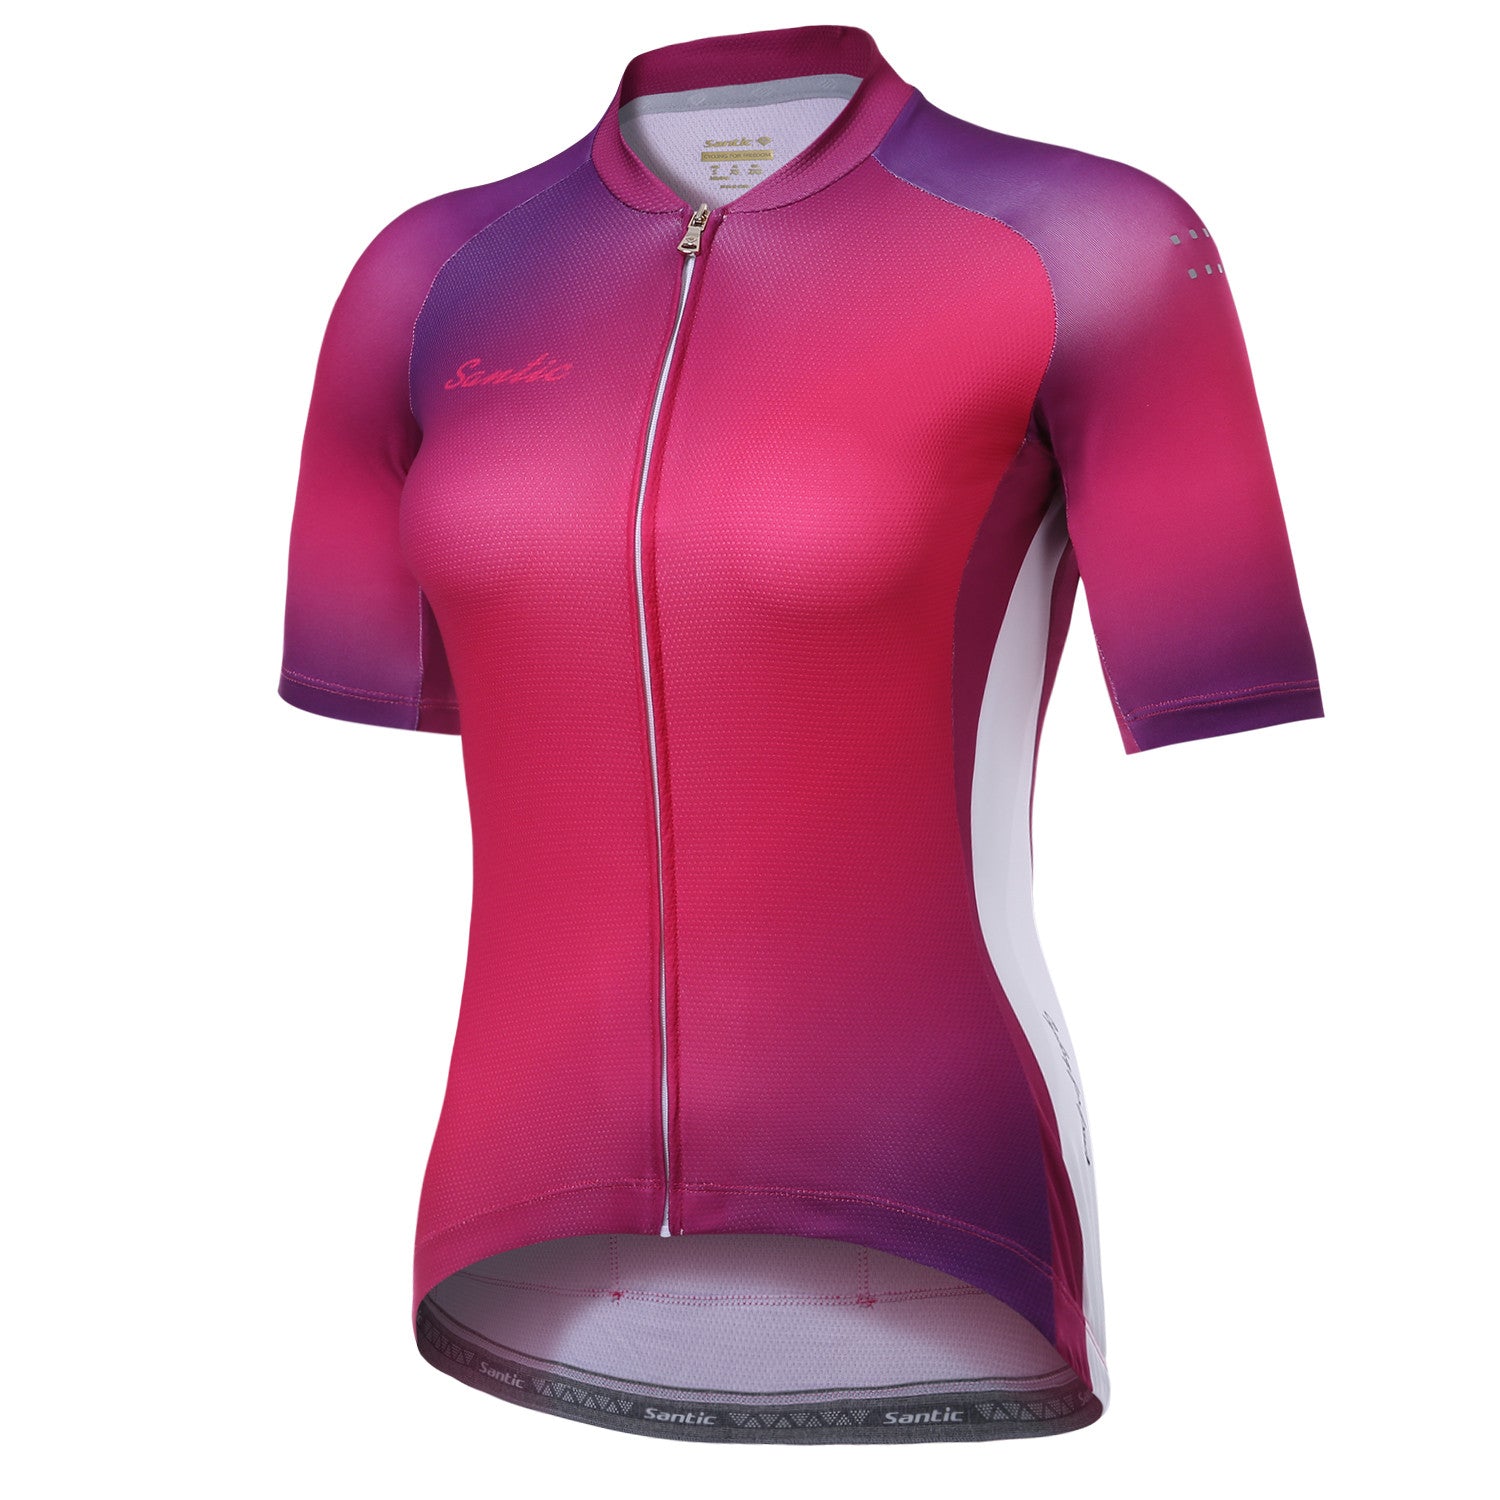 FGNM Women's Cycling Jersey Summer Triathlon Outdoor Sportswear Cycling  Clothing Short-Sleeved Shirt…See more FGNM Women's Cycling Jersey Summer